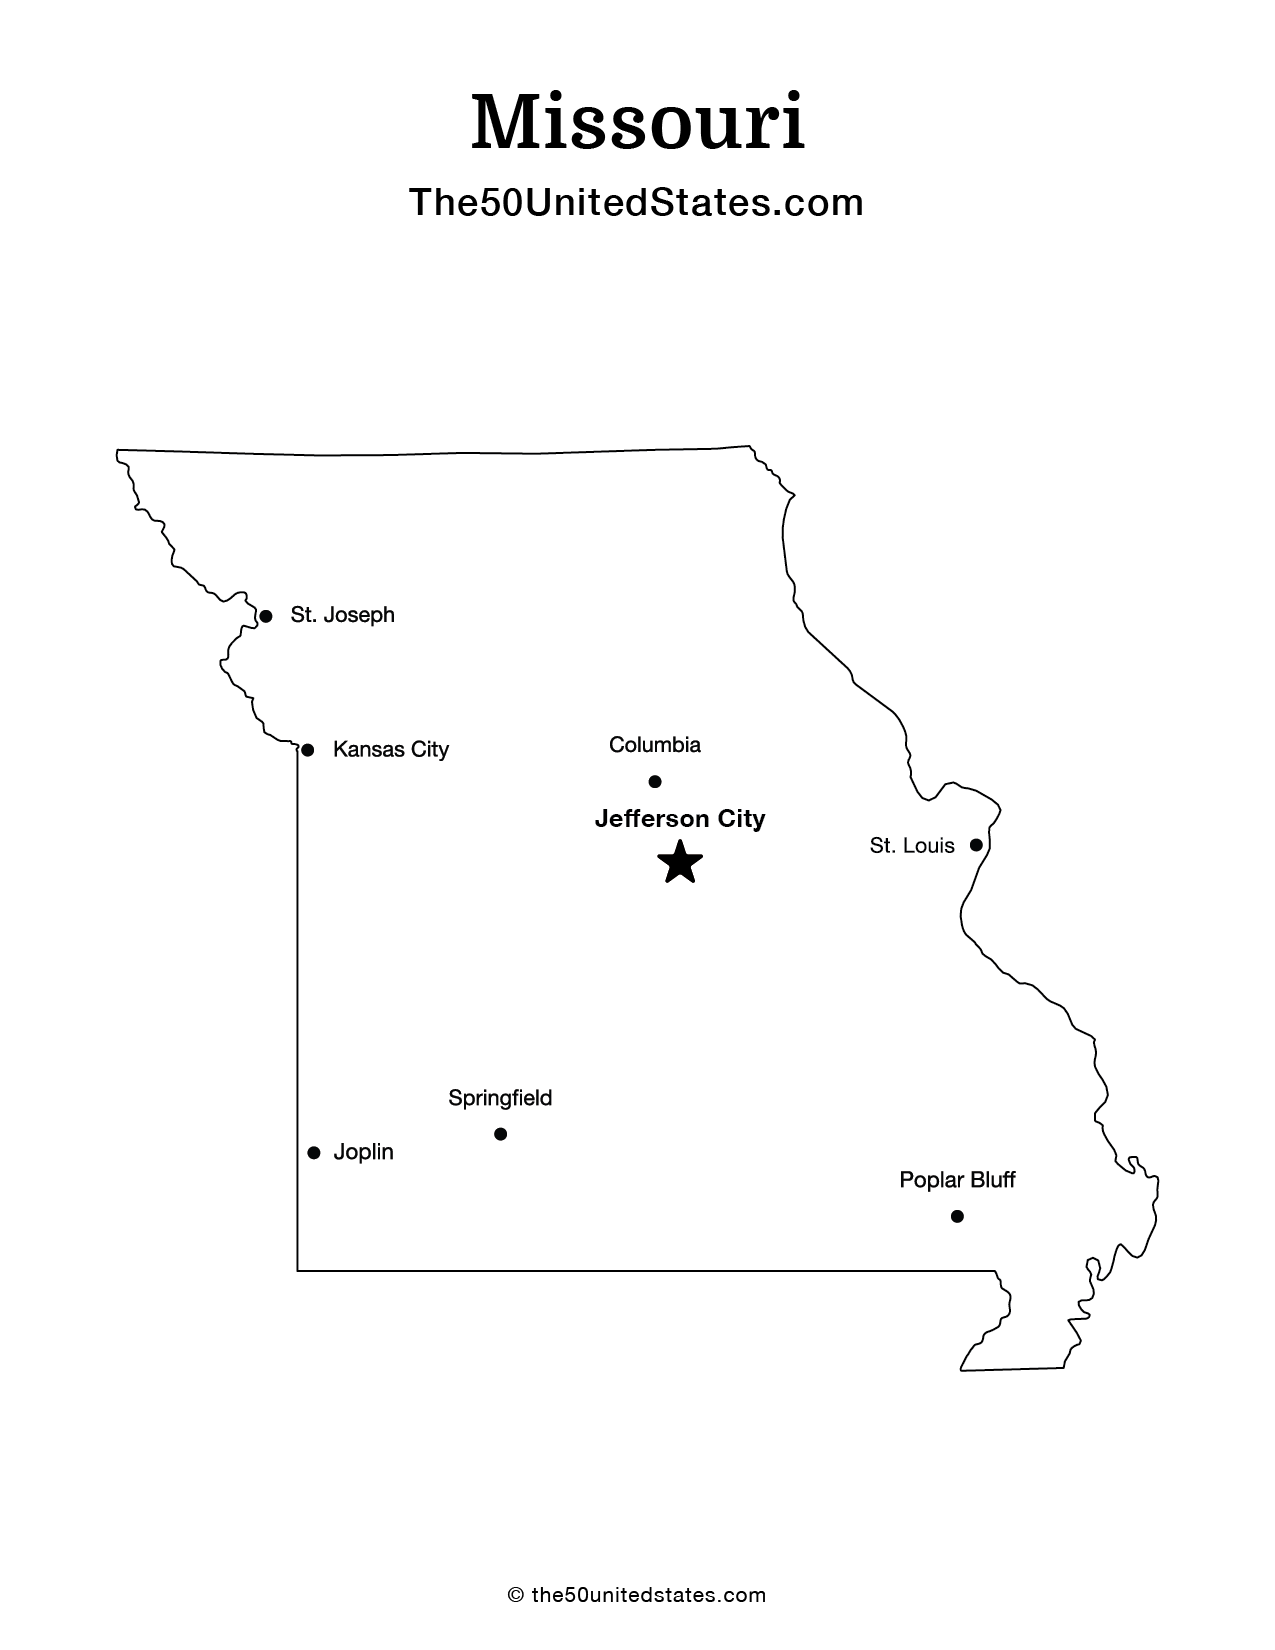 Map of Missouri with Cities (Labeled)